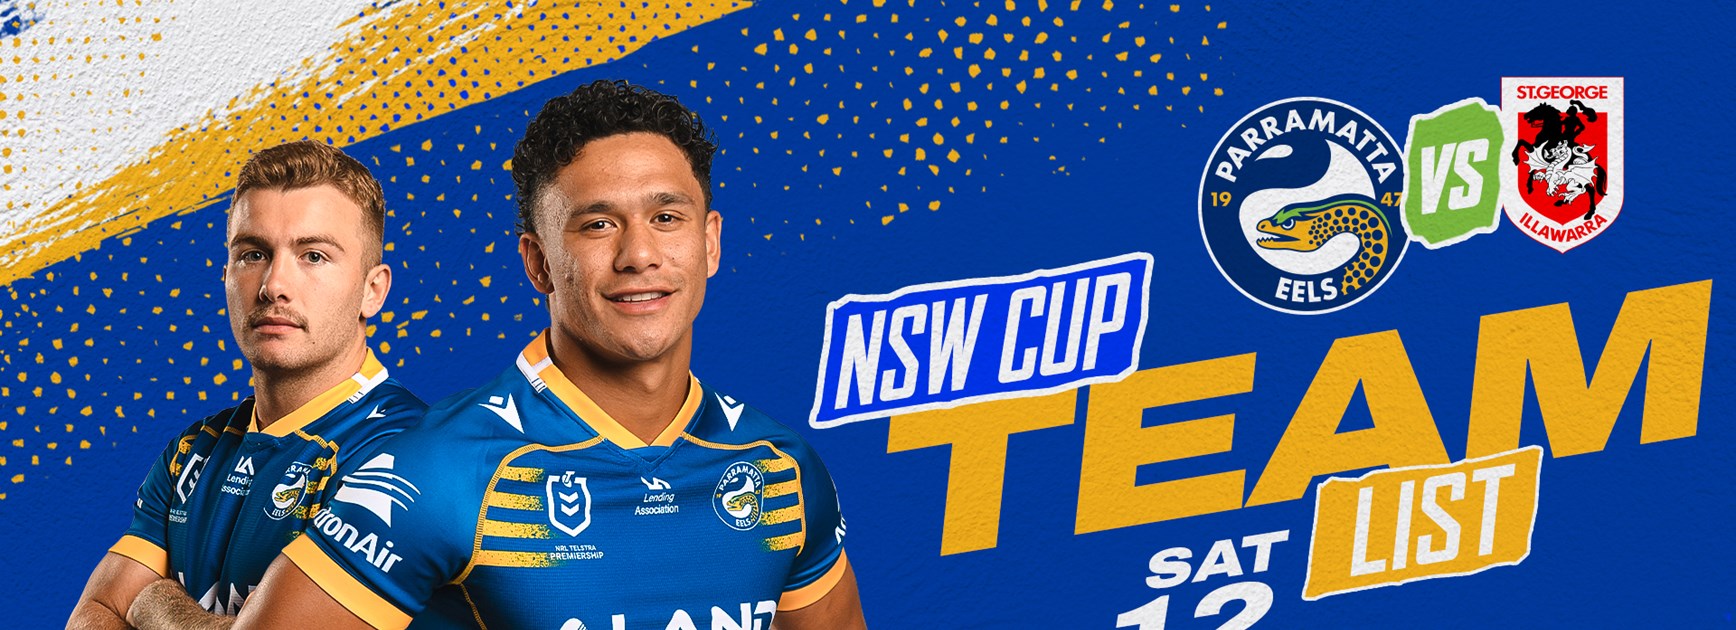 NSW Cup Team List - Dragons v Eels, Round One